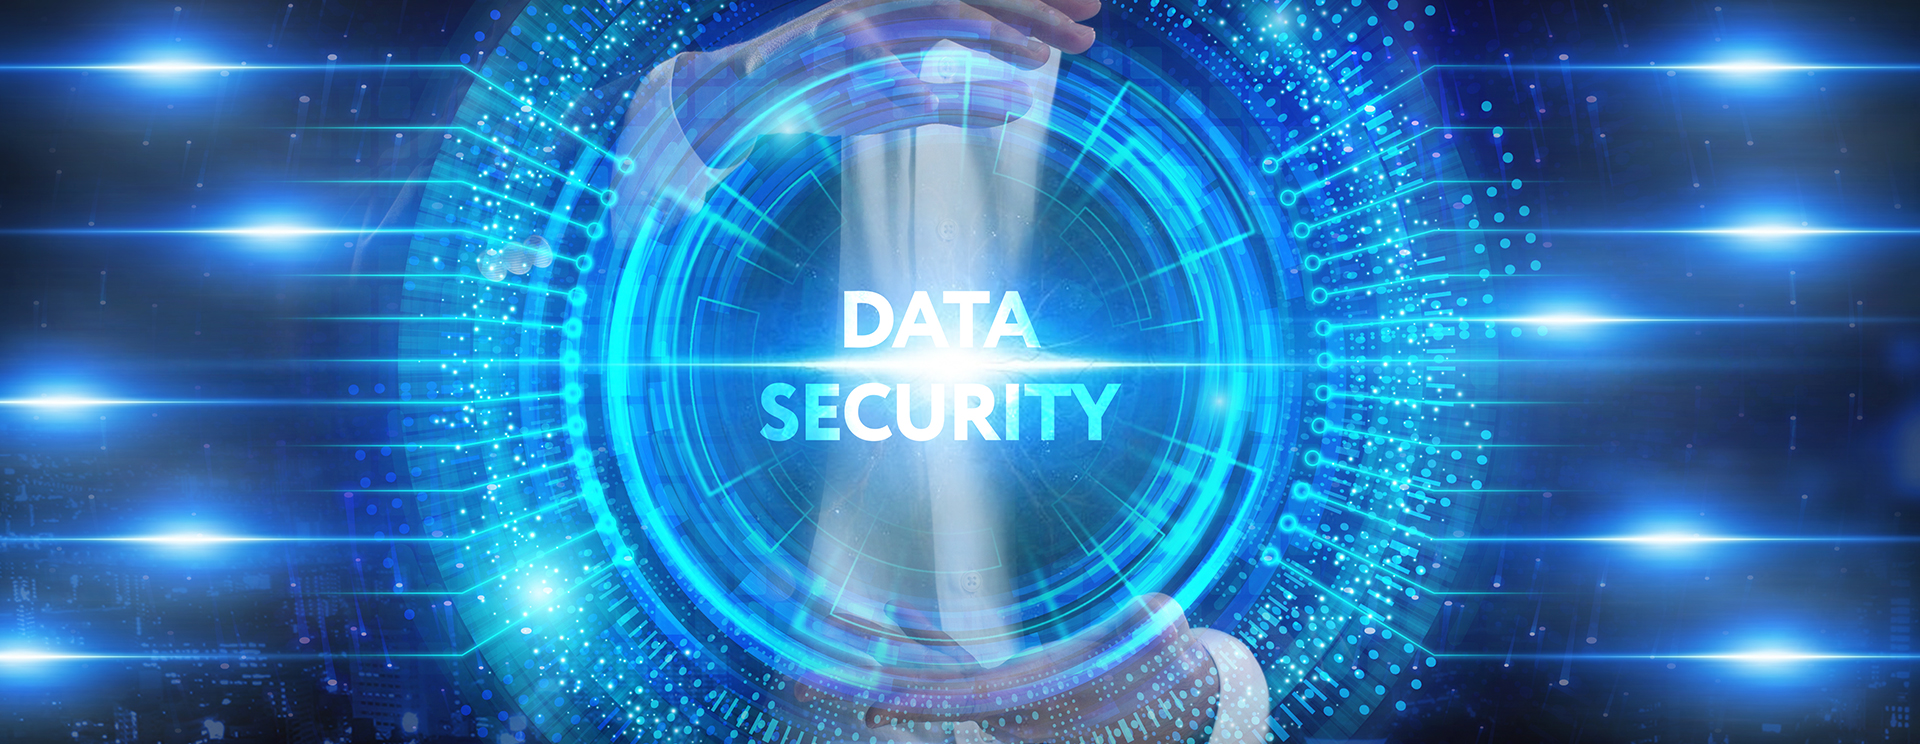 Top 6 Data Security Challenges and How to Address Them